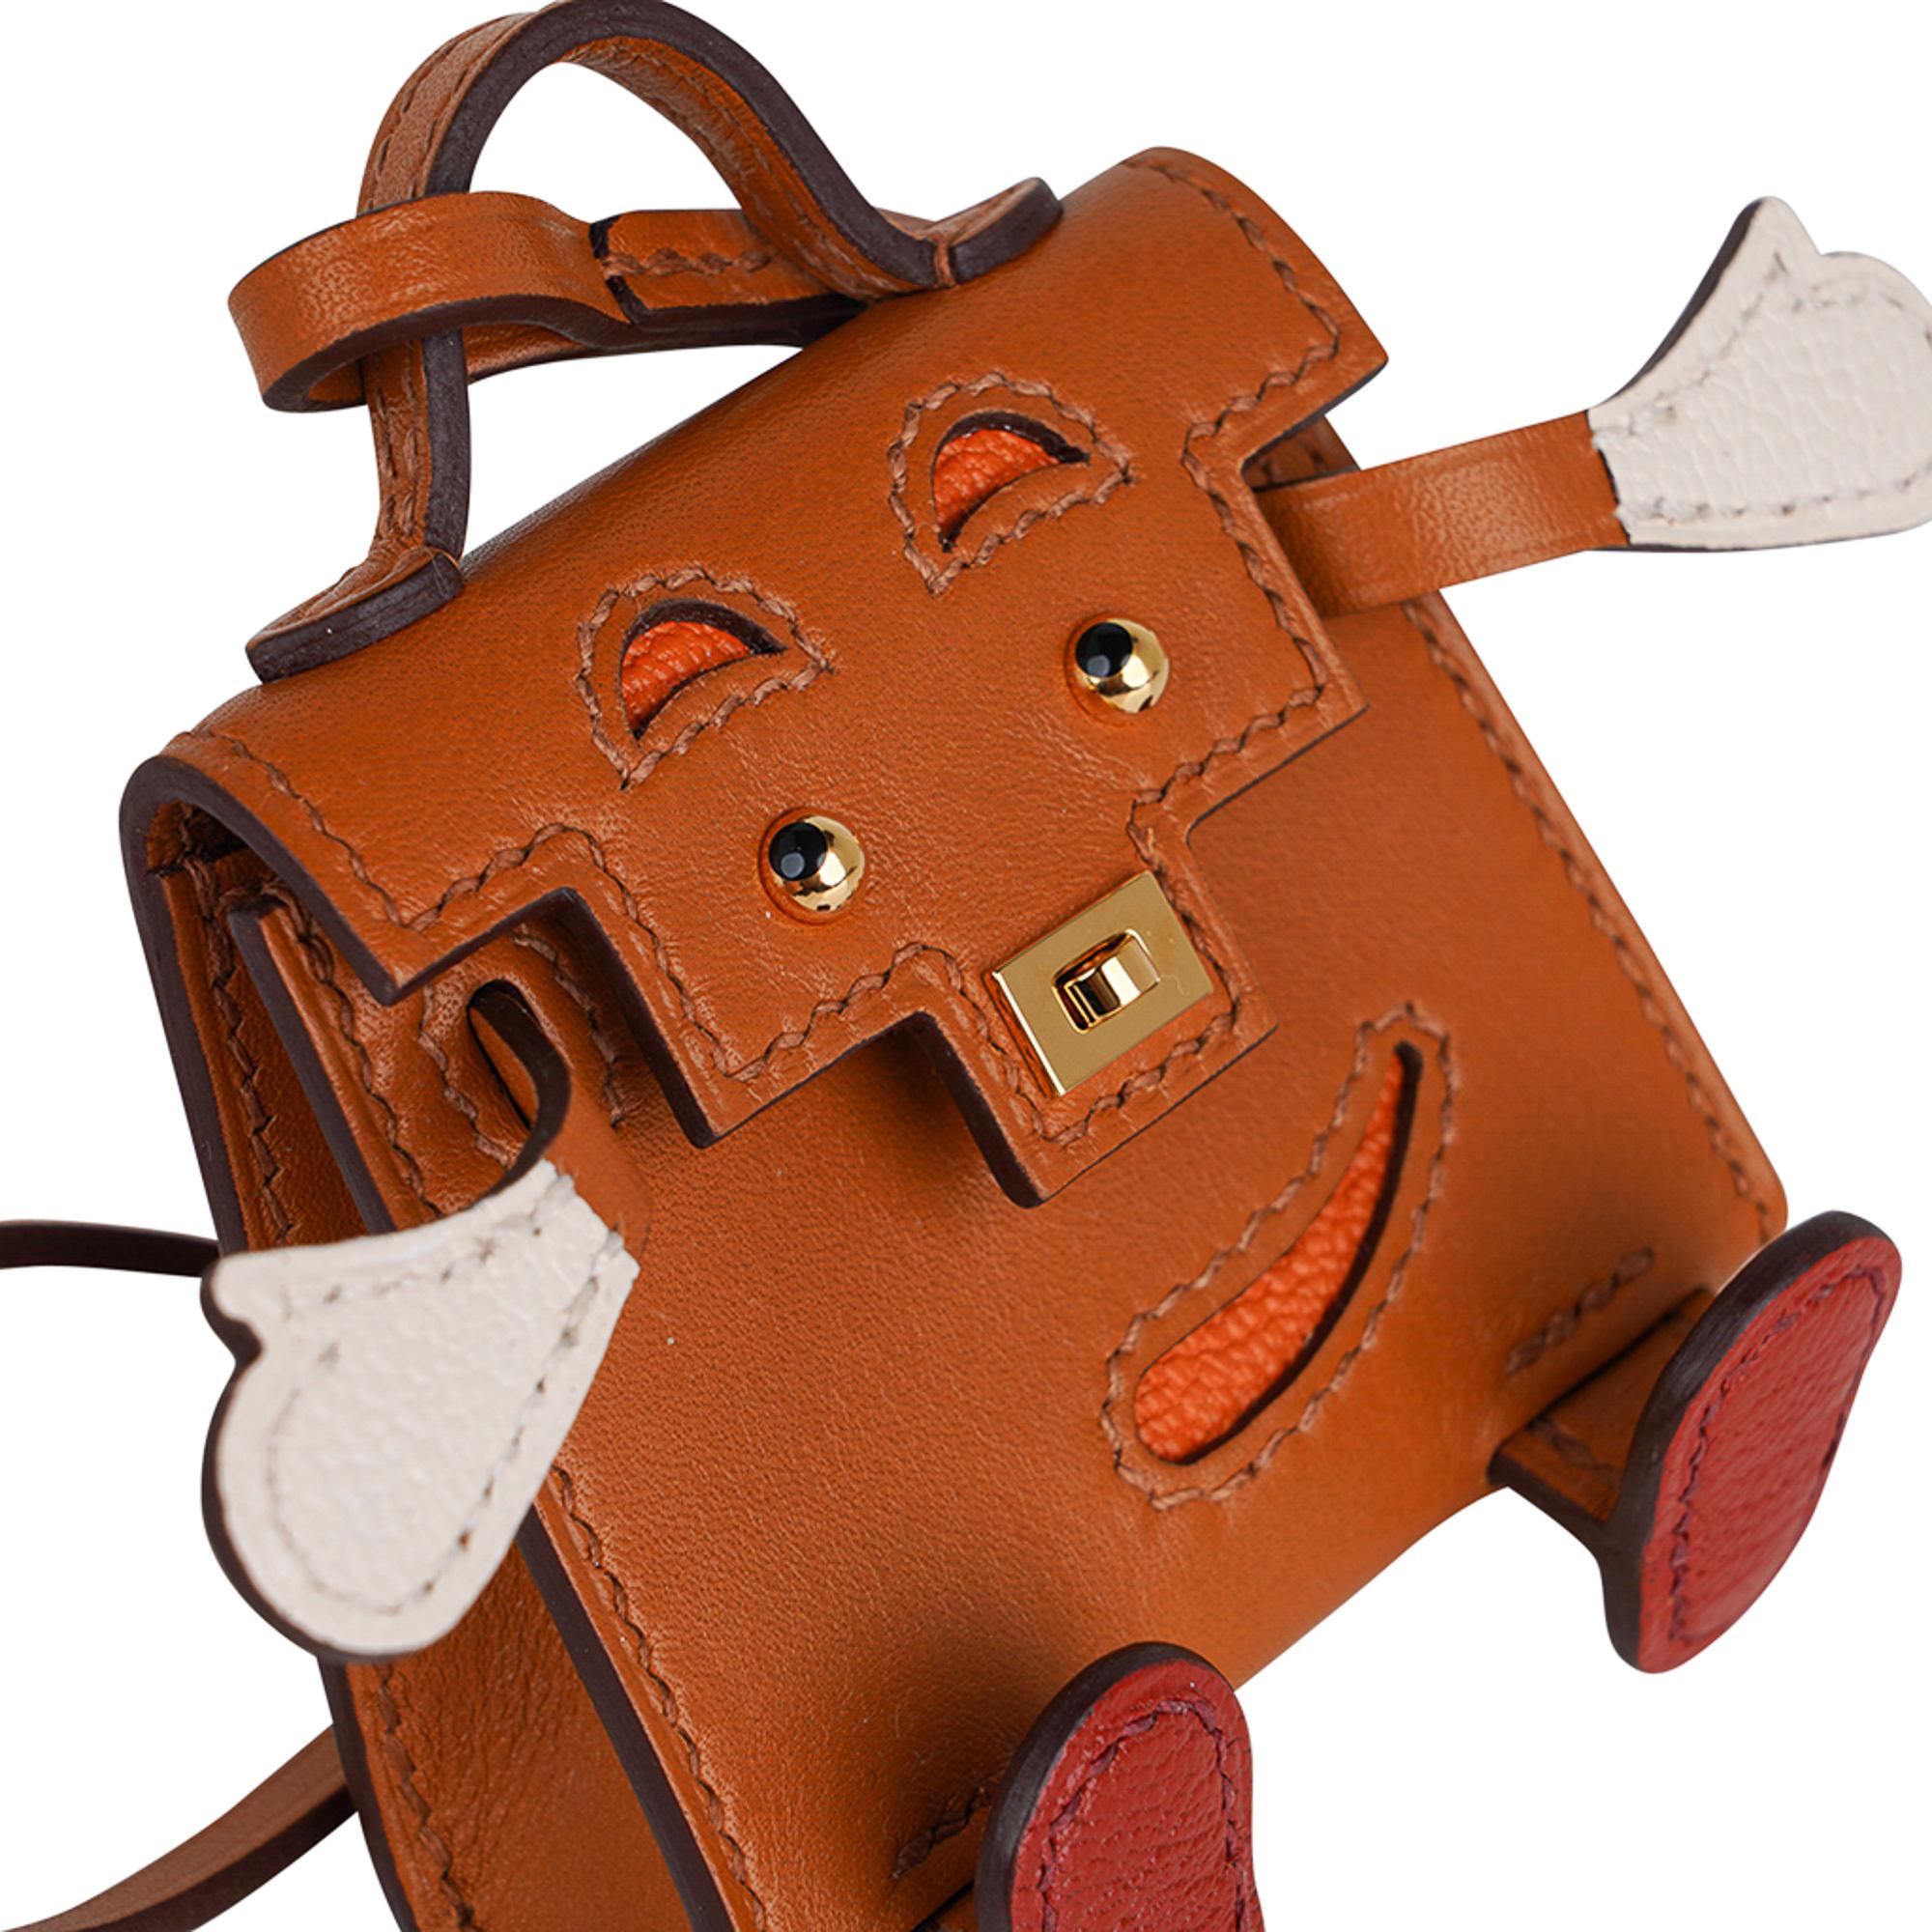 Mightychic offers a guaranteed authentic very rare limited edition Hermes Kelly Idole bag charm featured in Sable, Nata, H Orange and Brique Tadelakt leather.
Whimsical and delightful this fabulous charm has a turn lock that works.
Gold hardware